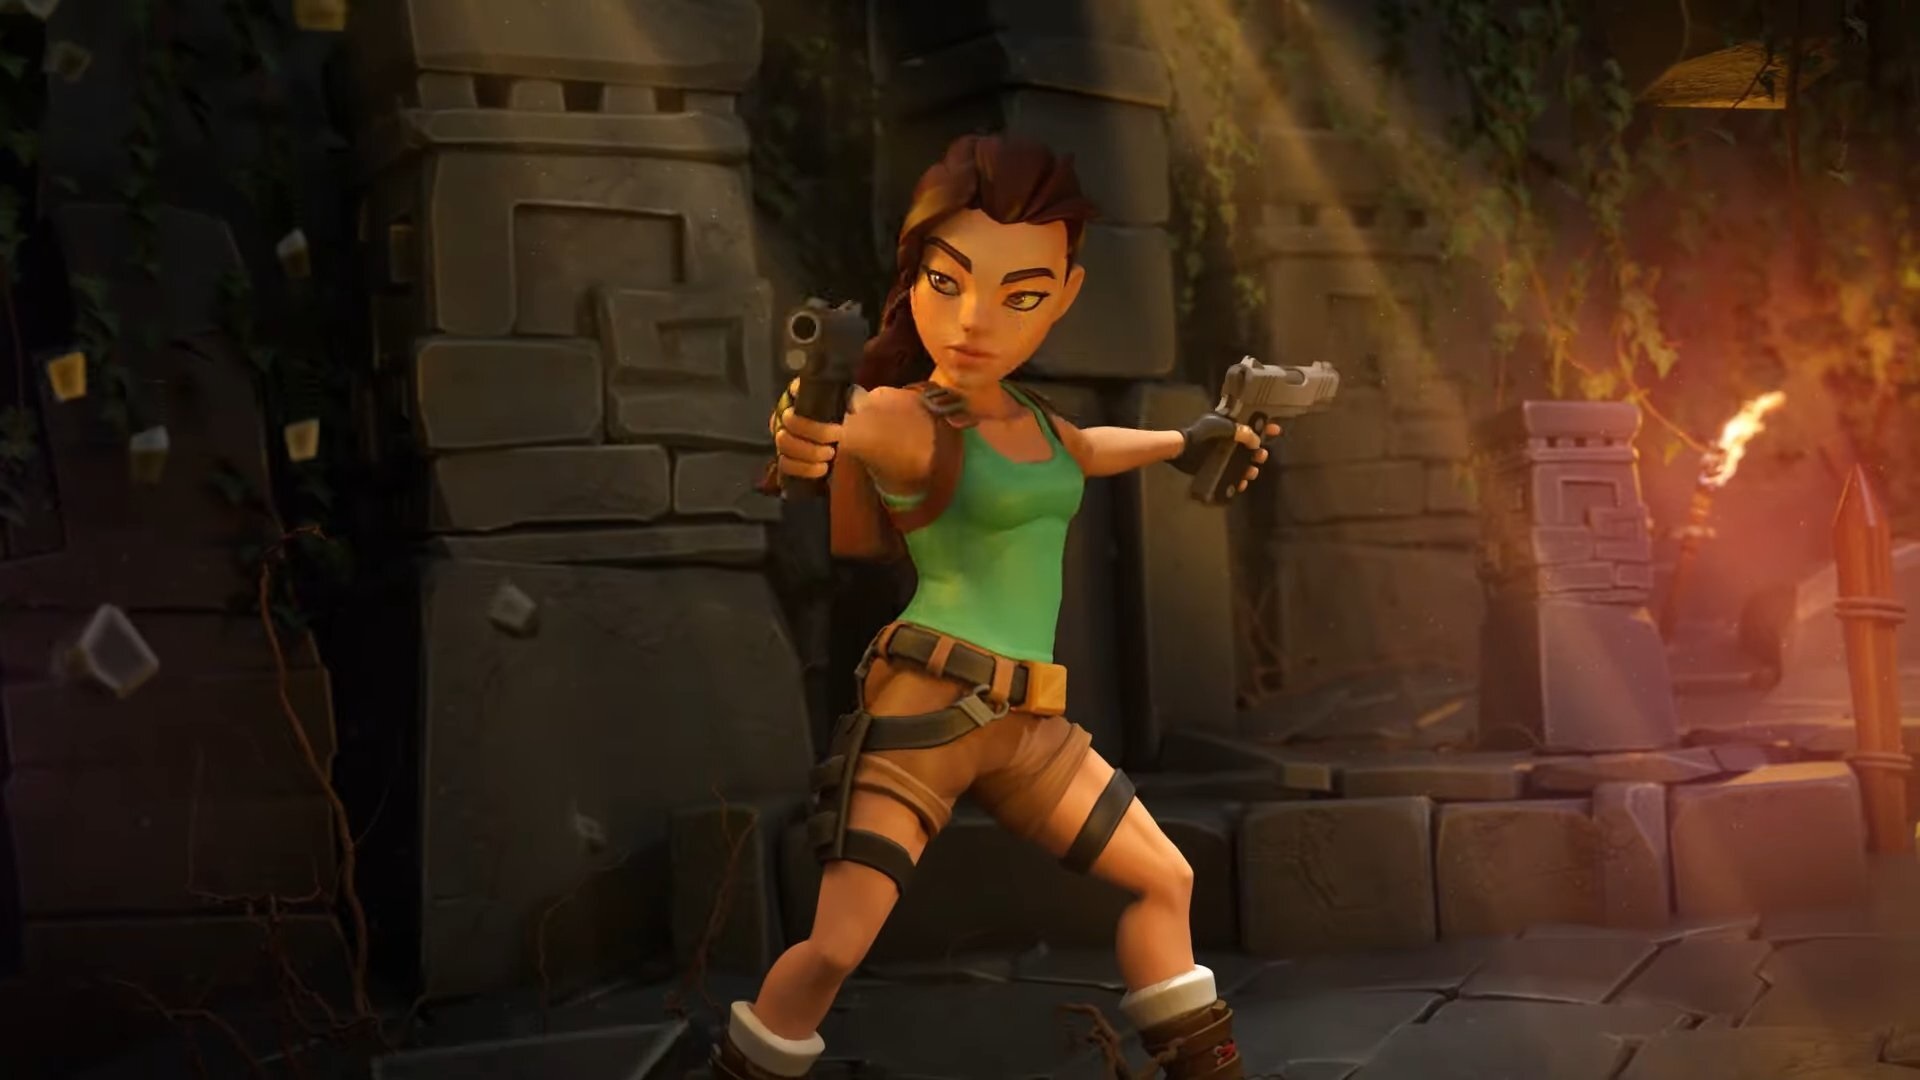 A Tomb Raider mobile game is coming that might revive the series' run